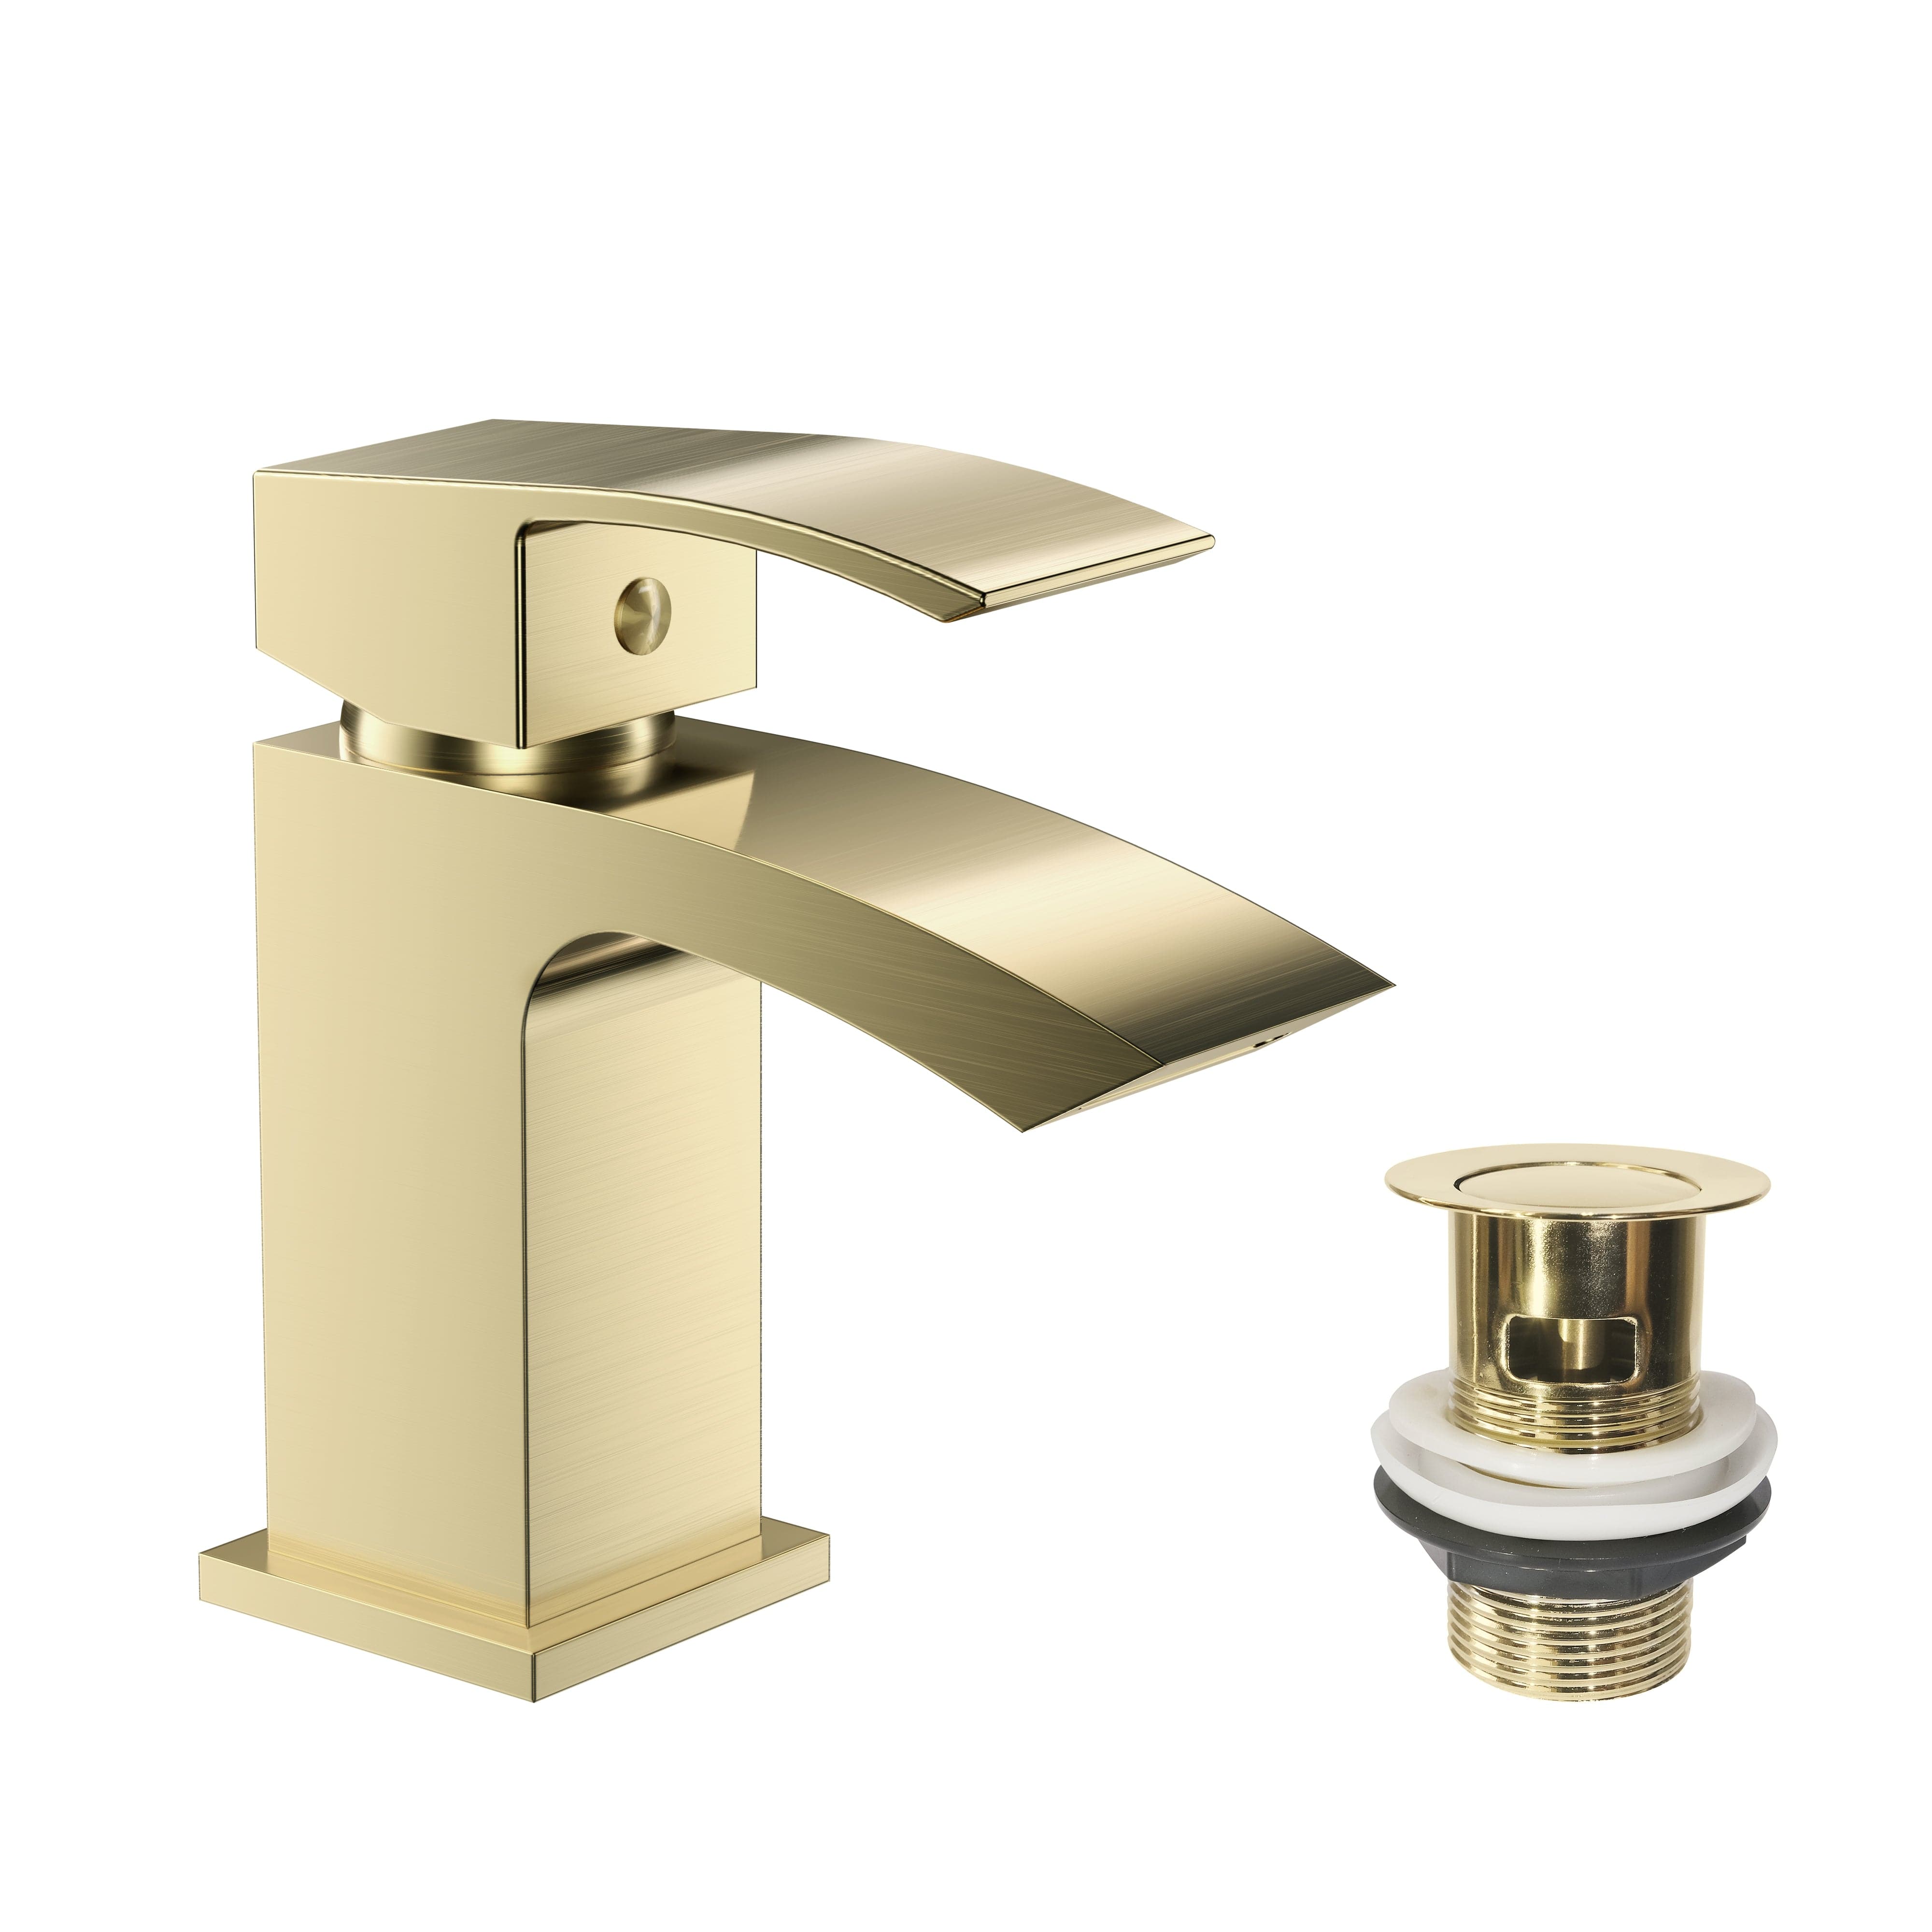 Trace Mono Basin Mixer Tap with Waste - Brushed Brass